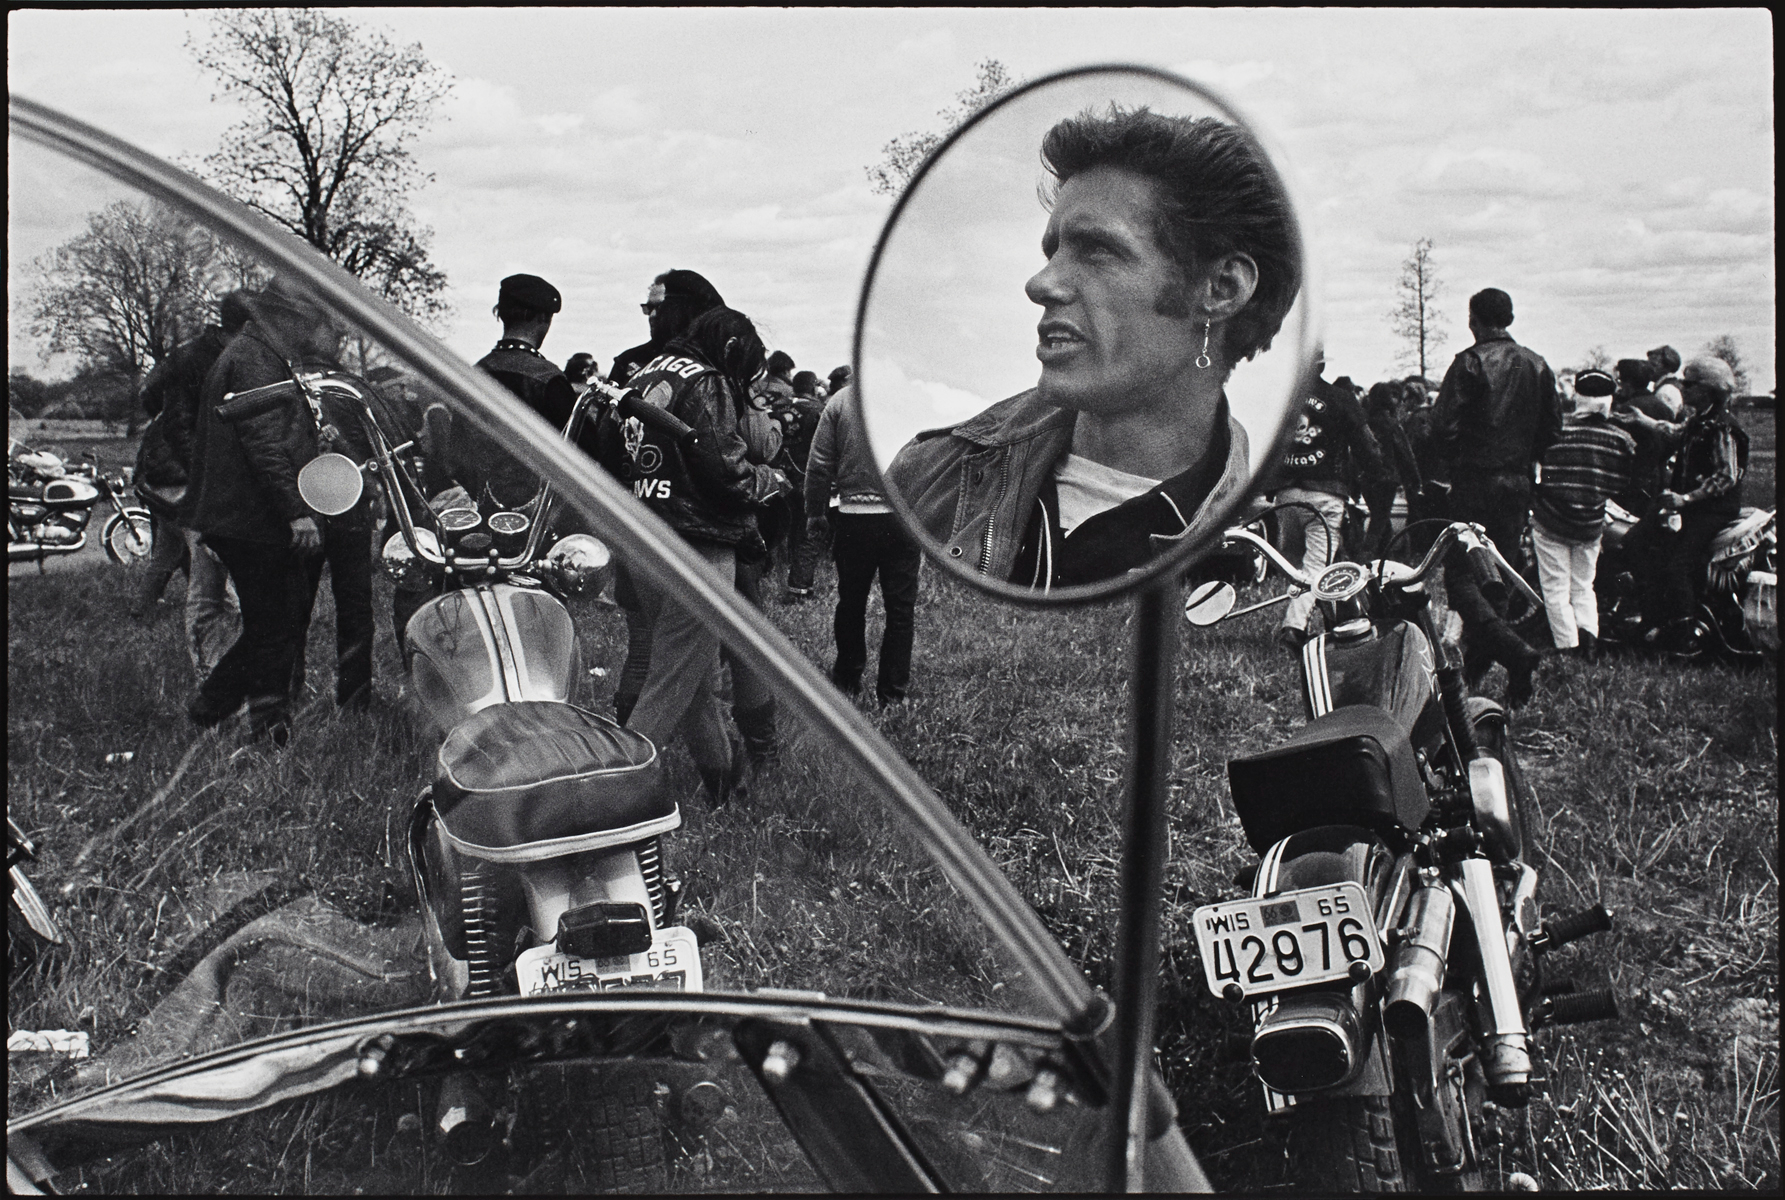     Danny Lyon, Cal, Elkhorn, Wisconsin, 1966. Gelatin Silver Print, 40.6 x 50.8 cm. Collection of the Art Gallery of Ontario. Promised
gift, James Lahey and Brian Lahey, in honour of our
mother Ellen Lahey. © 2015 Danny Lyon/Magnum
Photos. 

